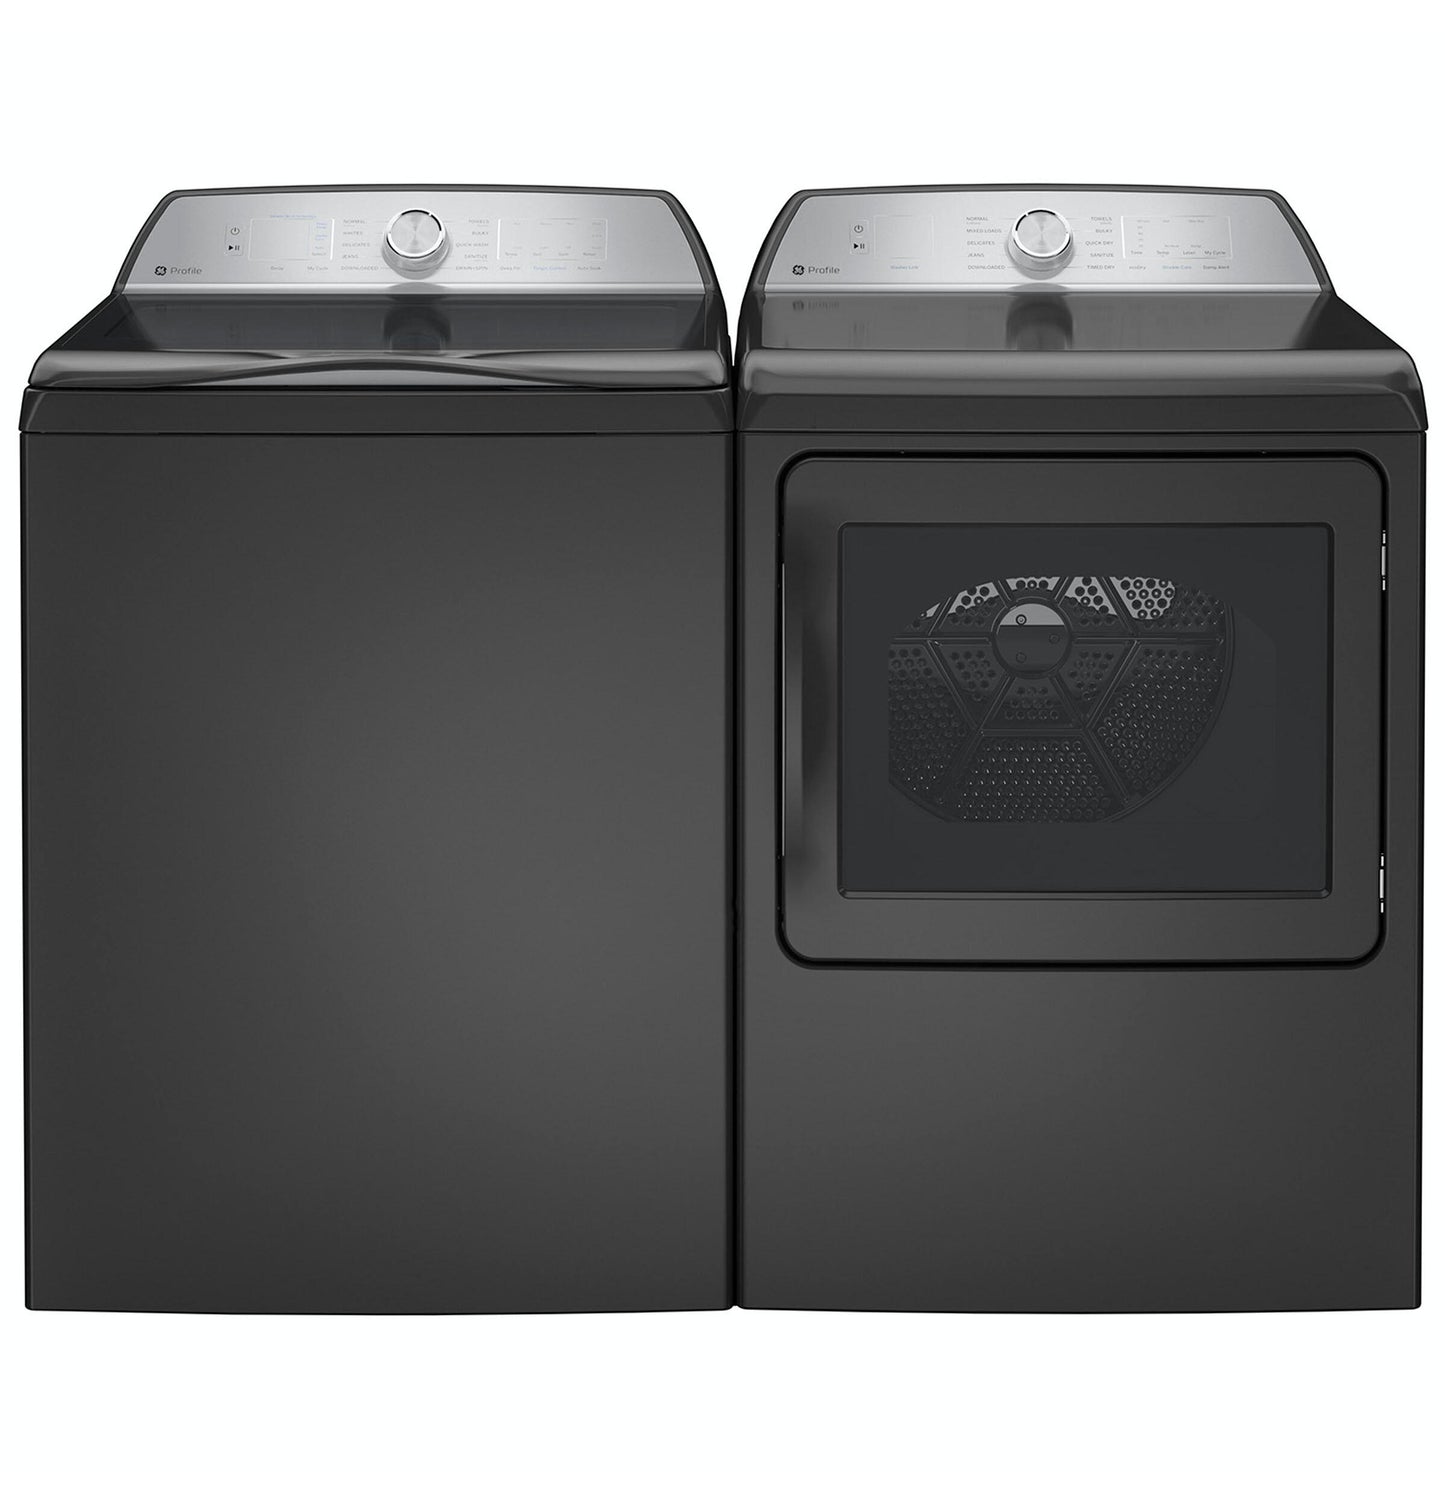 Ge Appliances PTW600BPRDG Ge Profile&#8482; 5.0 Cu. Ft. Capacity Washer With Smarter Wash Technology And Flexdispense&#8482;